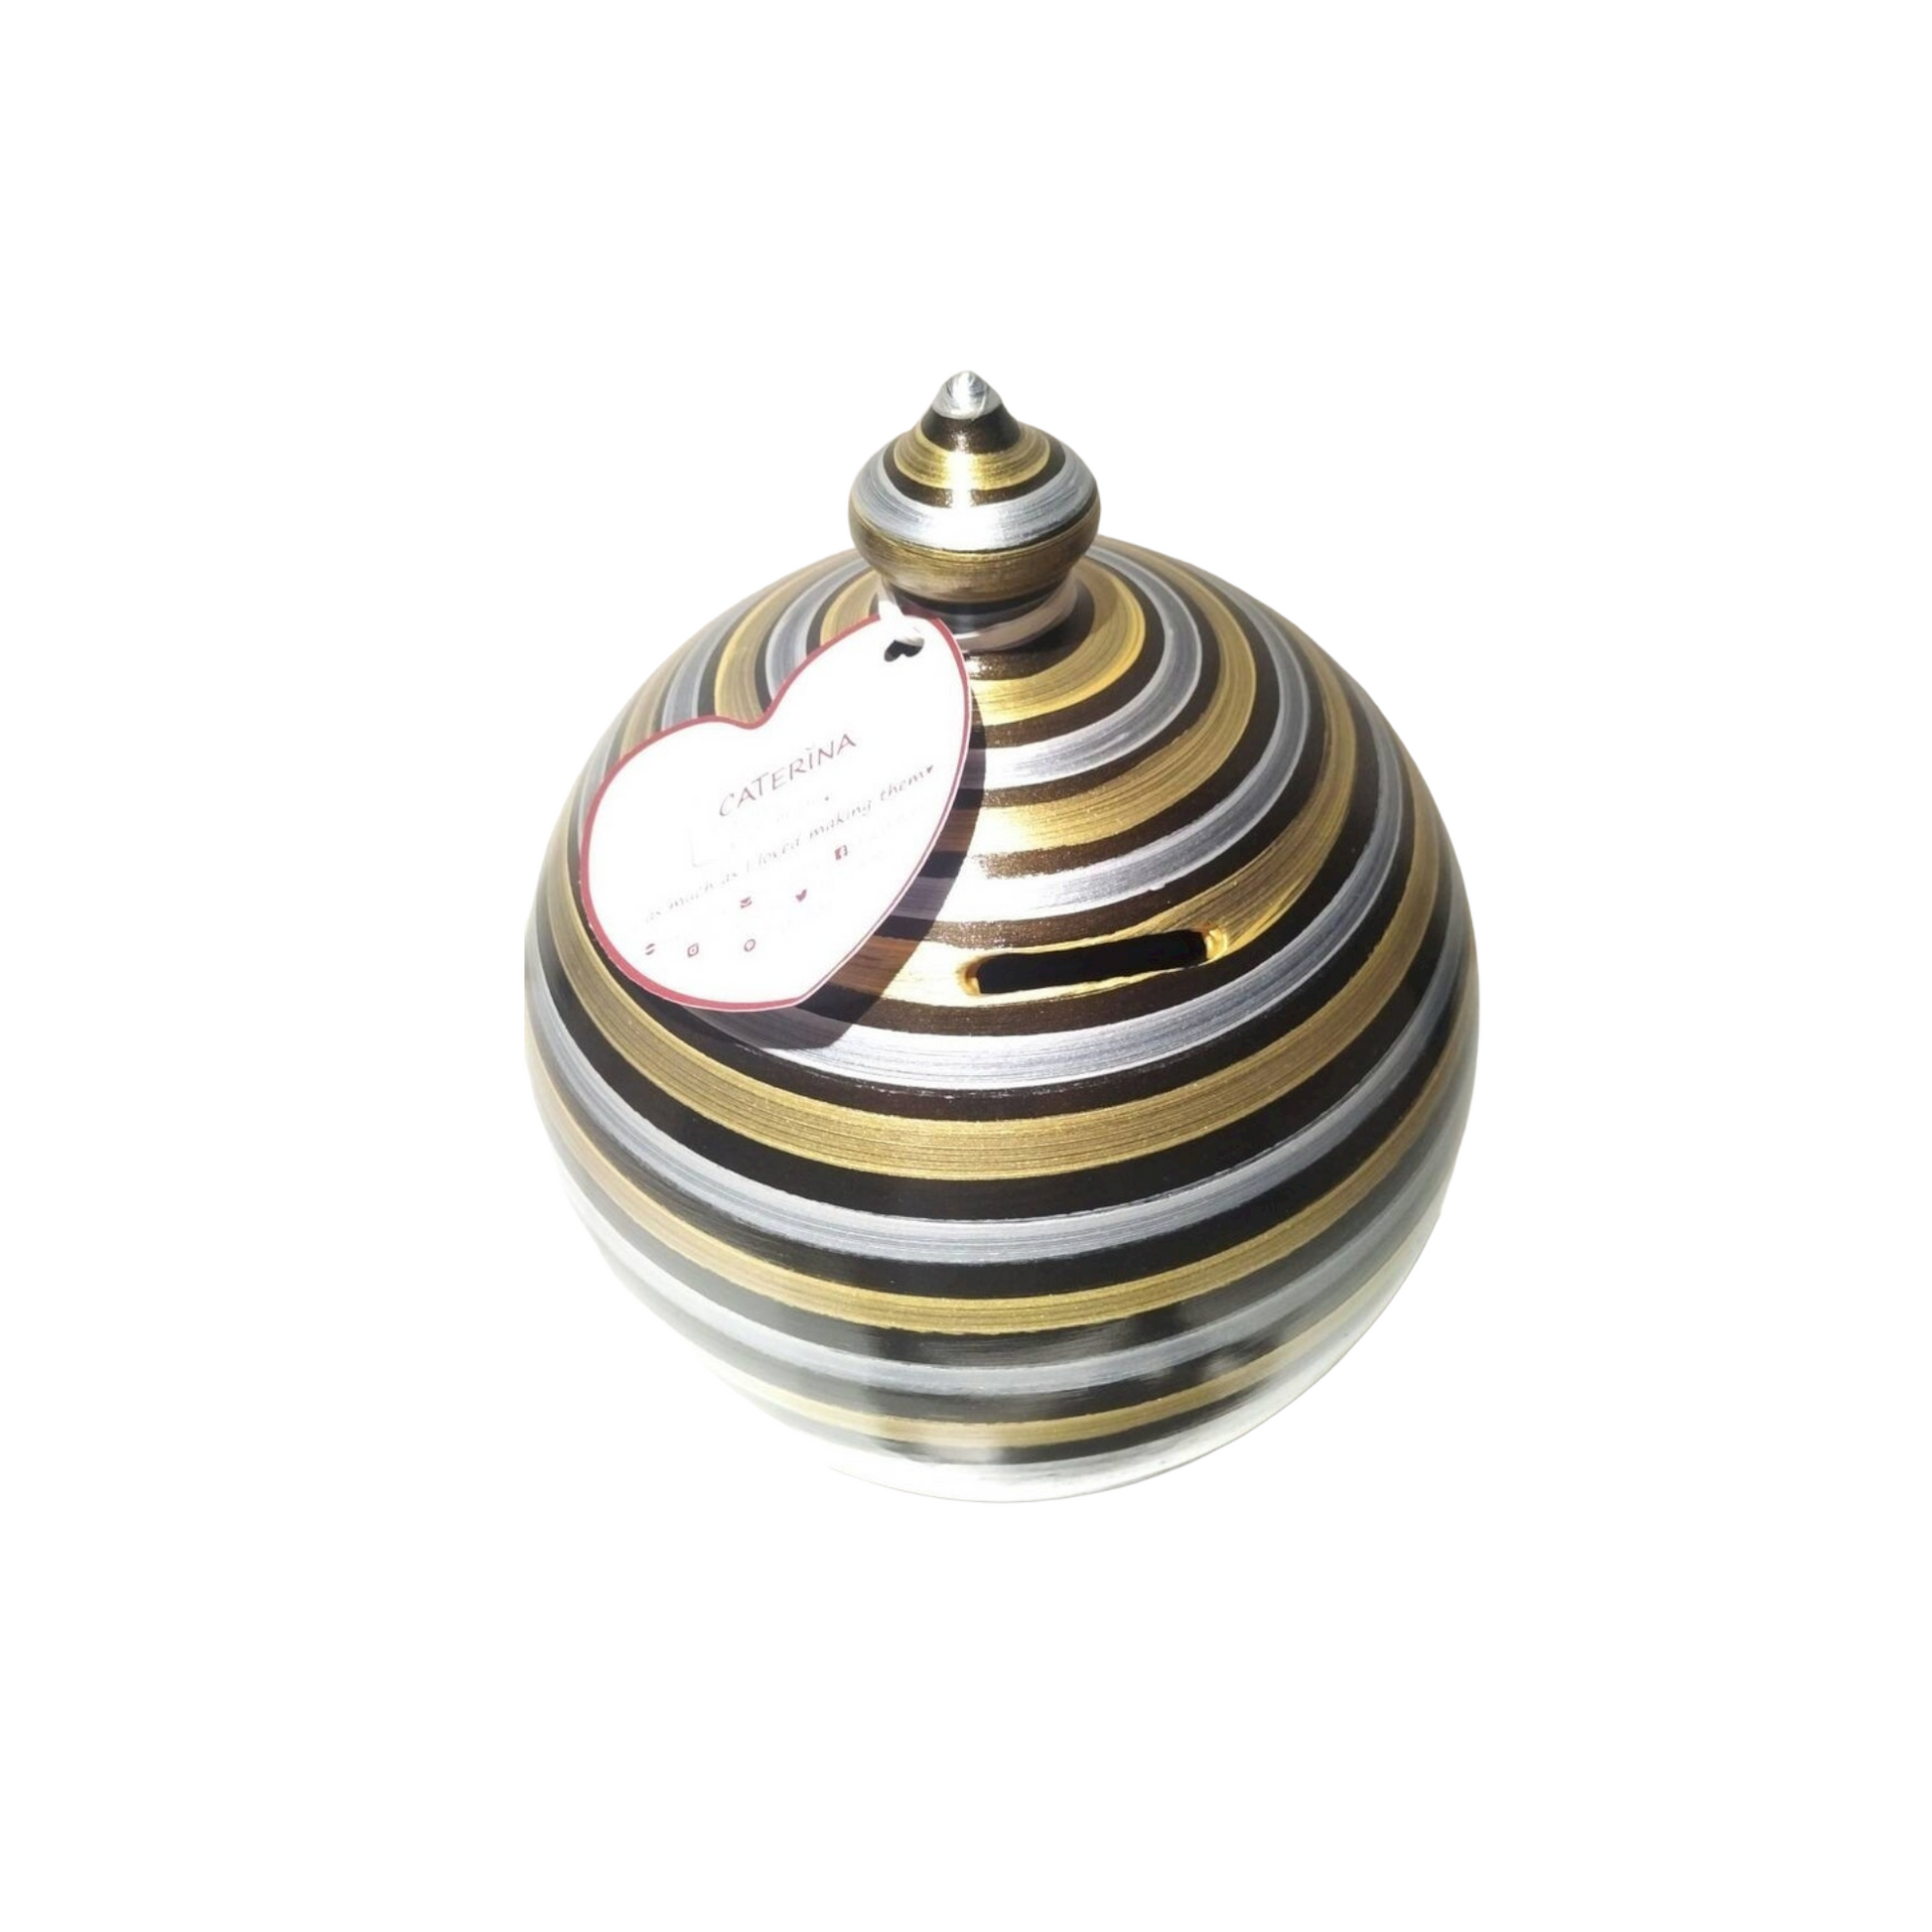 Handmade in Italy, the ideal gift for piggy bank lovers both kids and adults! Colors: Silver, Black & Gold. 💰Size: 15 cm = 5.90 inches in height. Circumference: 40 cm = 15.74 inches. With hole and stopper plug, or without hole.